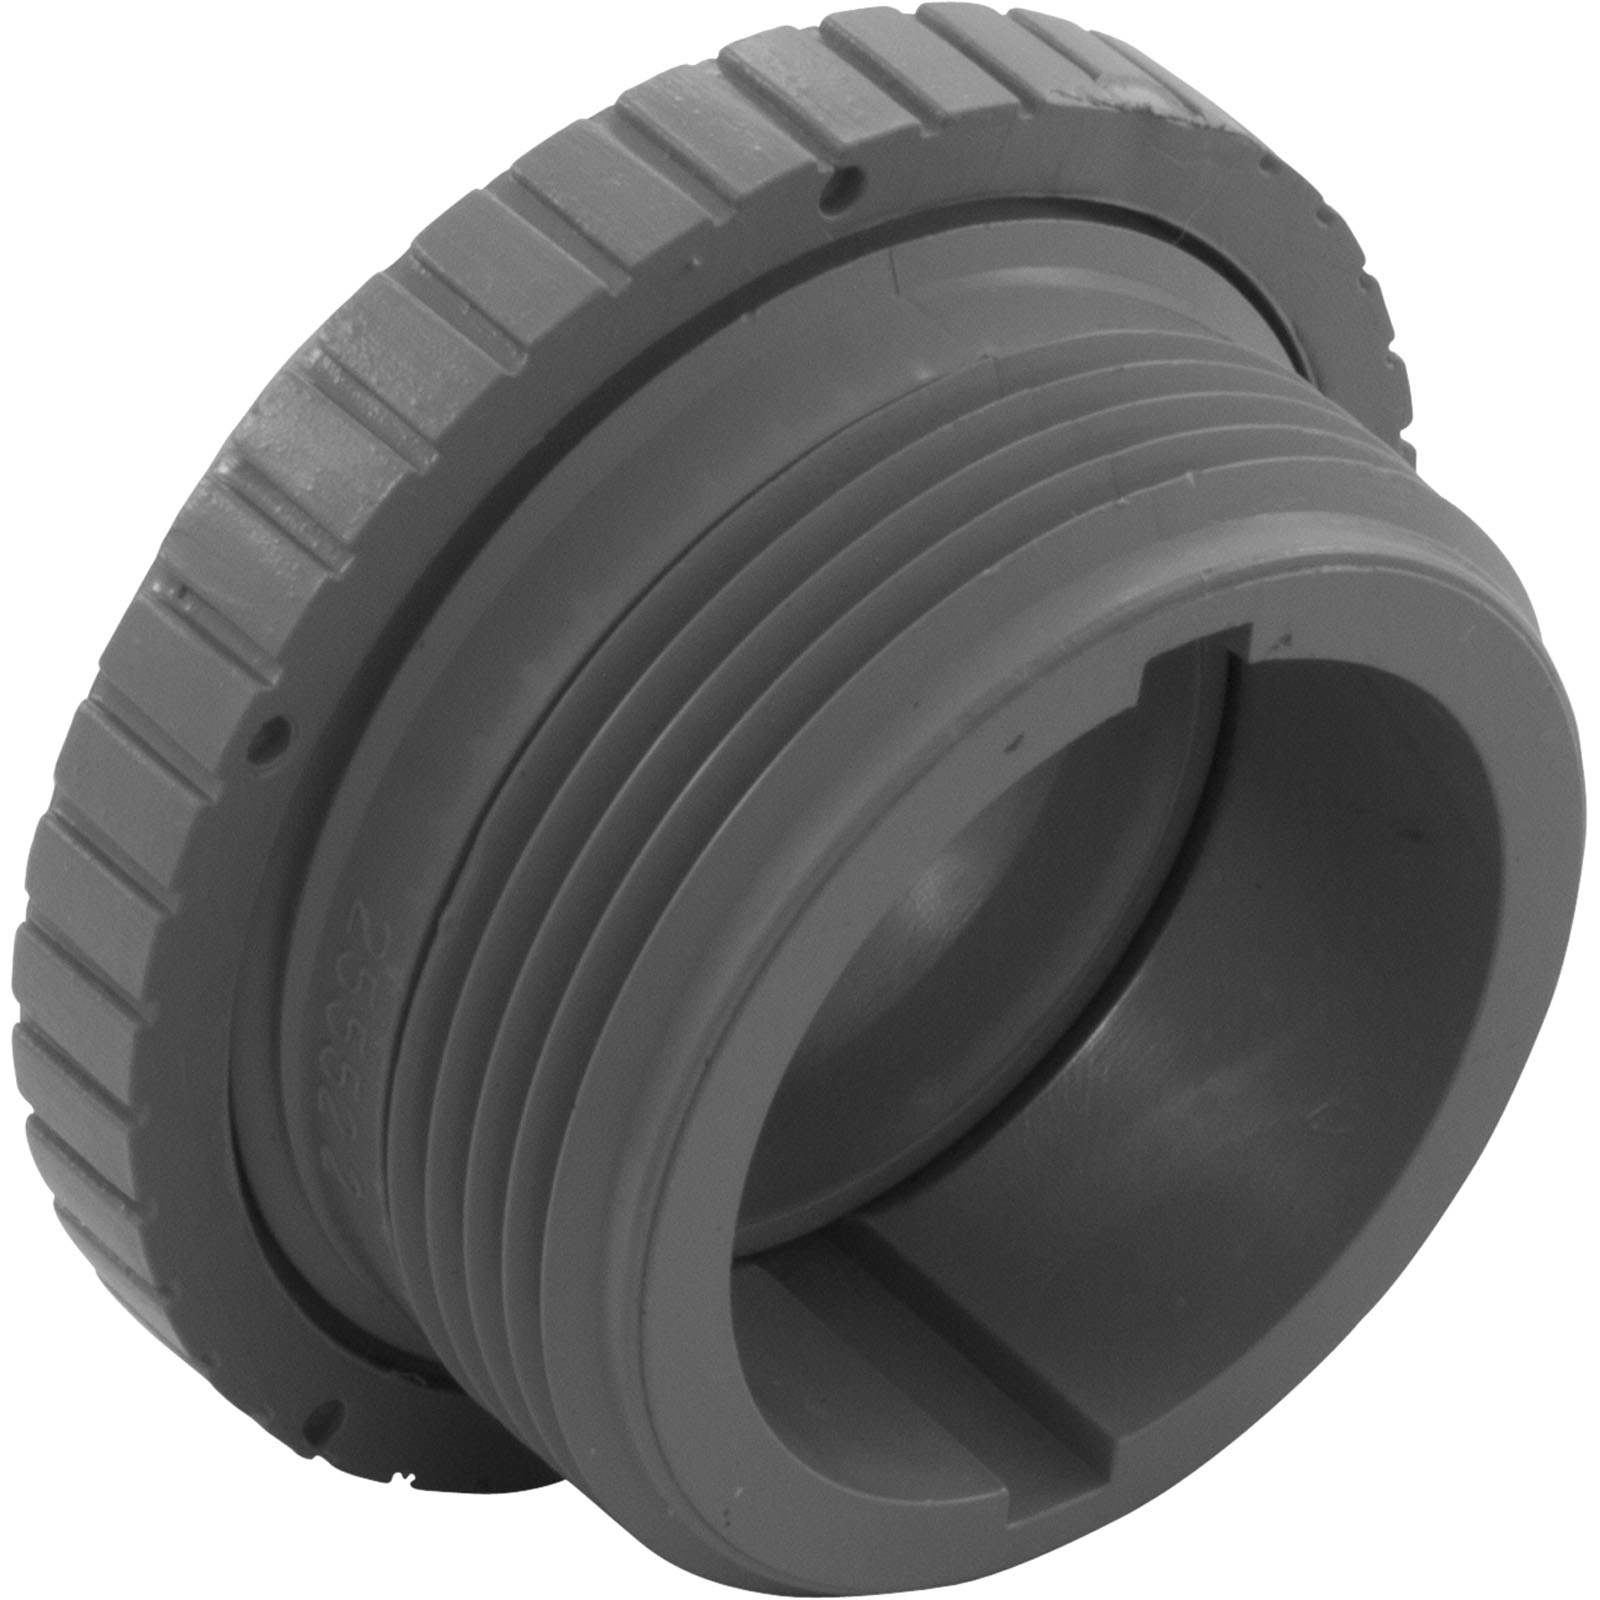 Picture of 25552-301-000 Eyeball Fitting CMP 1-1/2